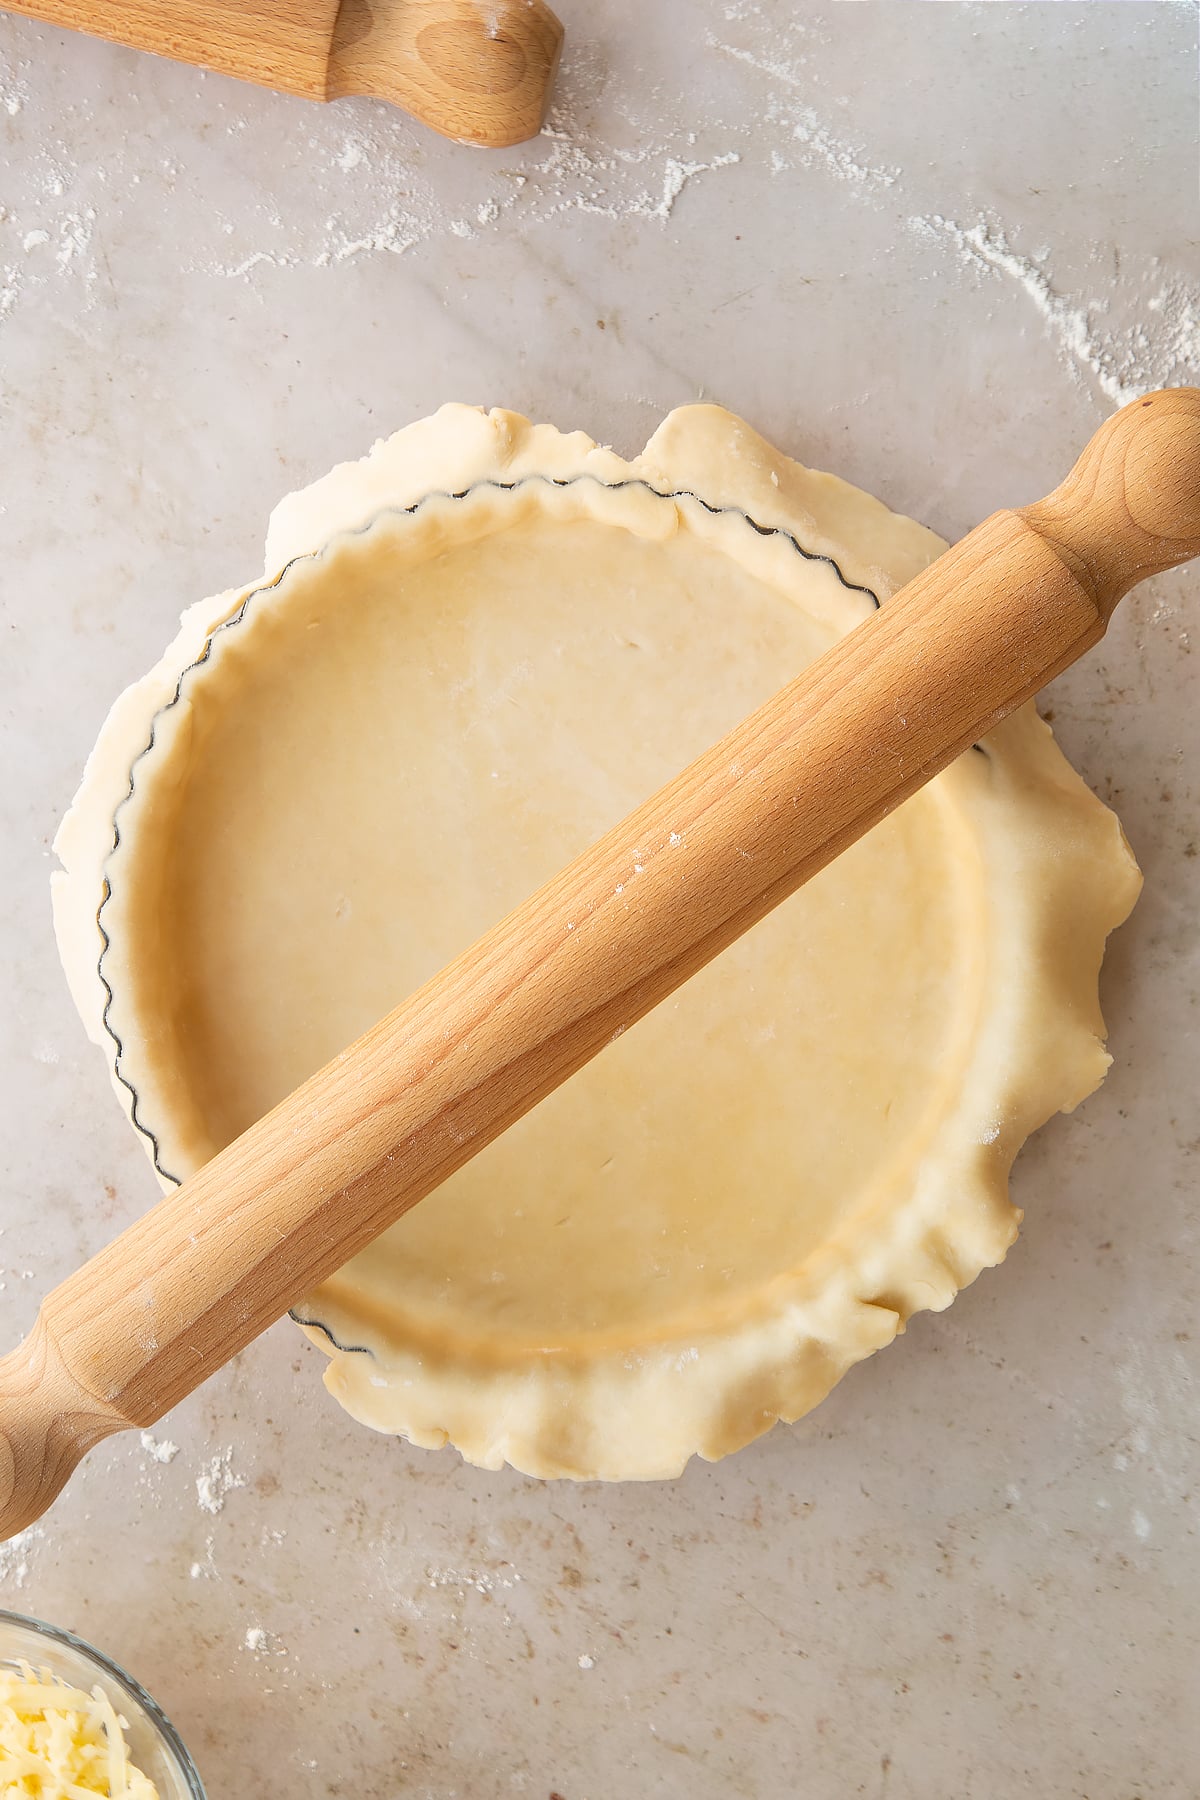 Overhead shot of a rolling pin rolling over the pie tin to remove the edges.